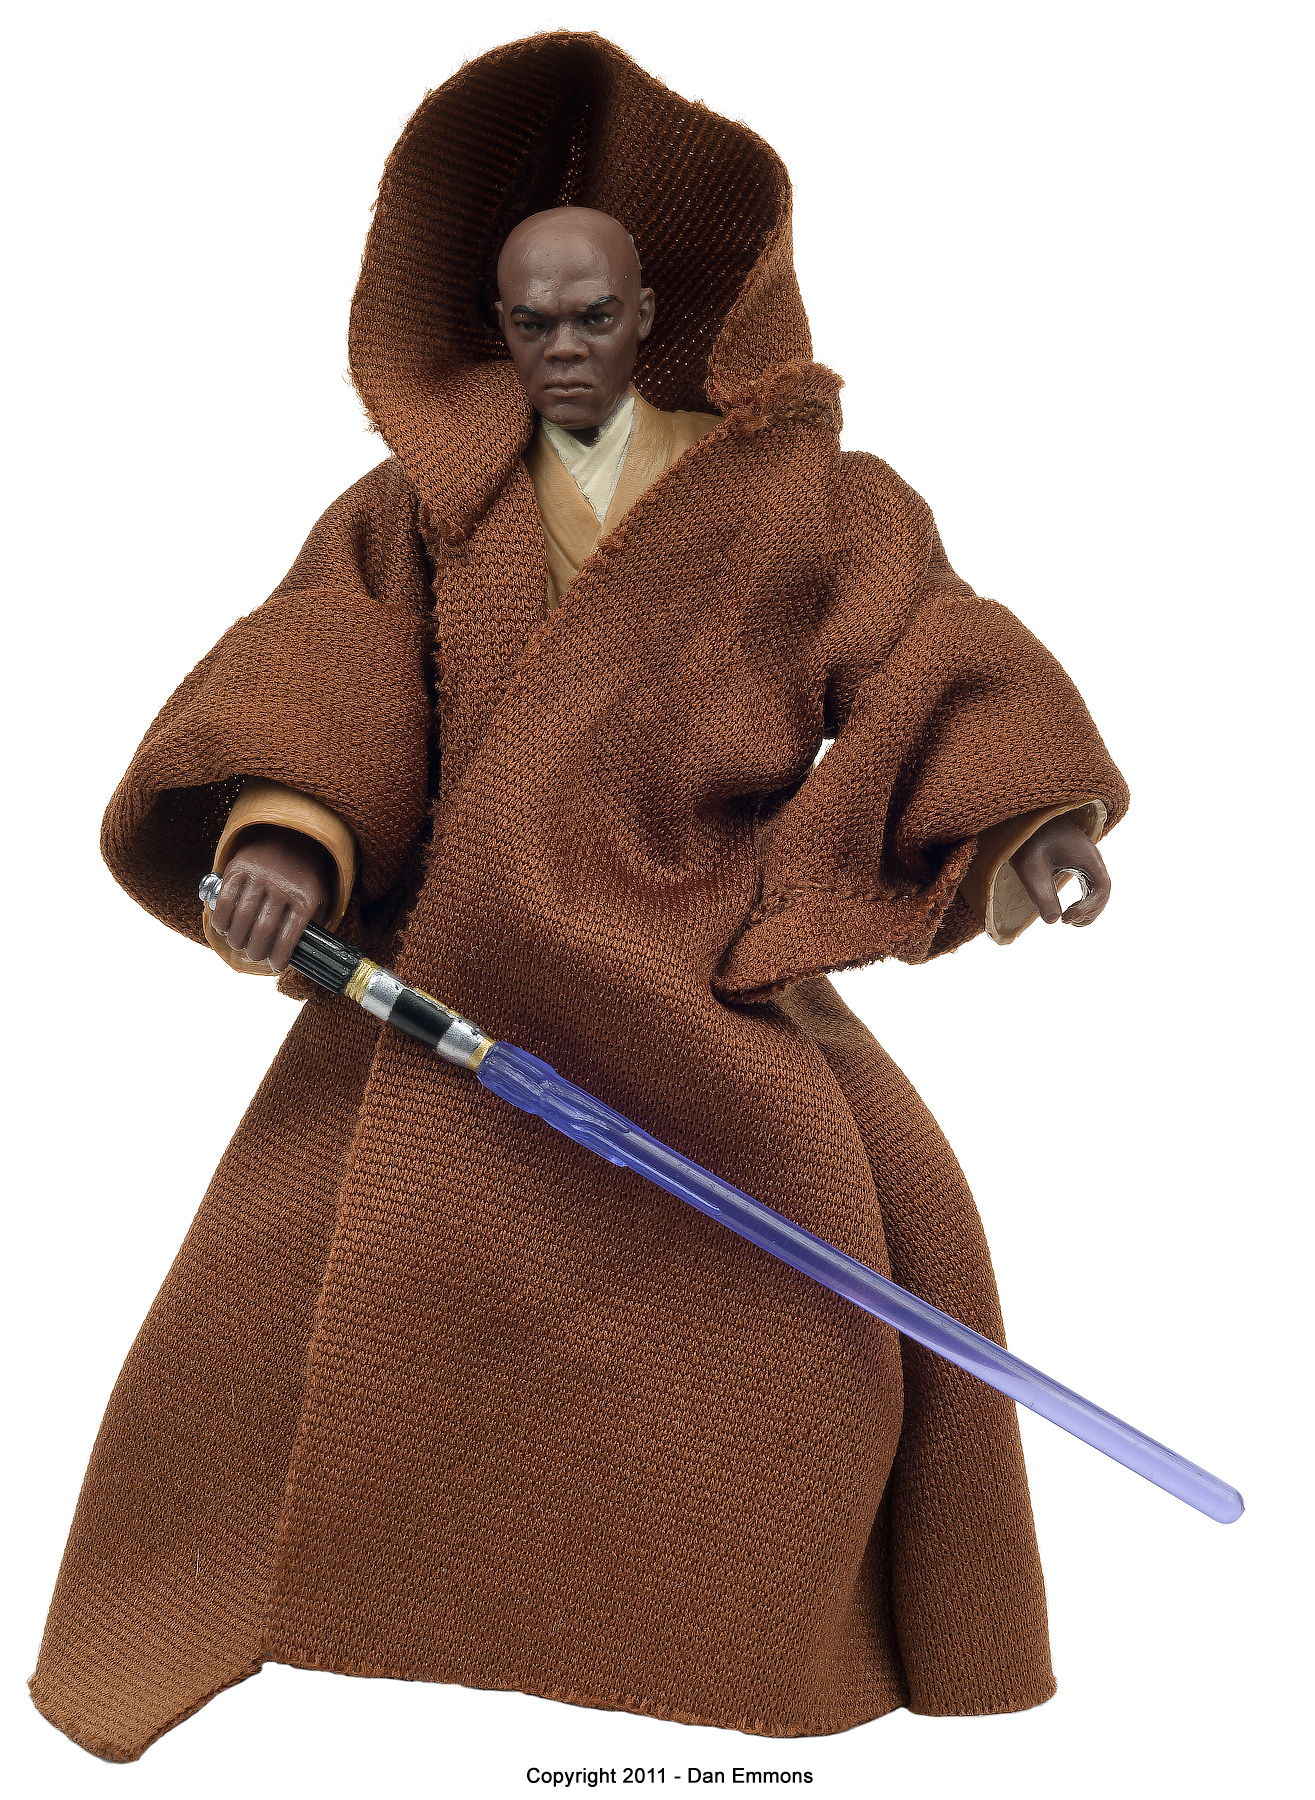 The Vintage Collection - VC35: Mace Windu